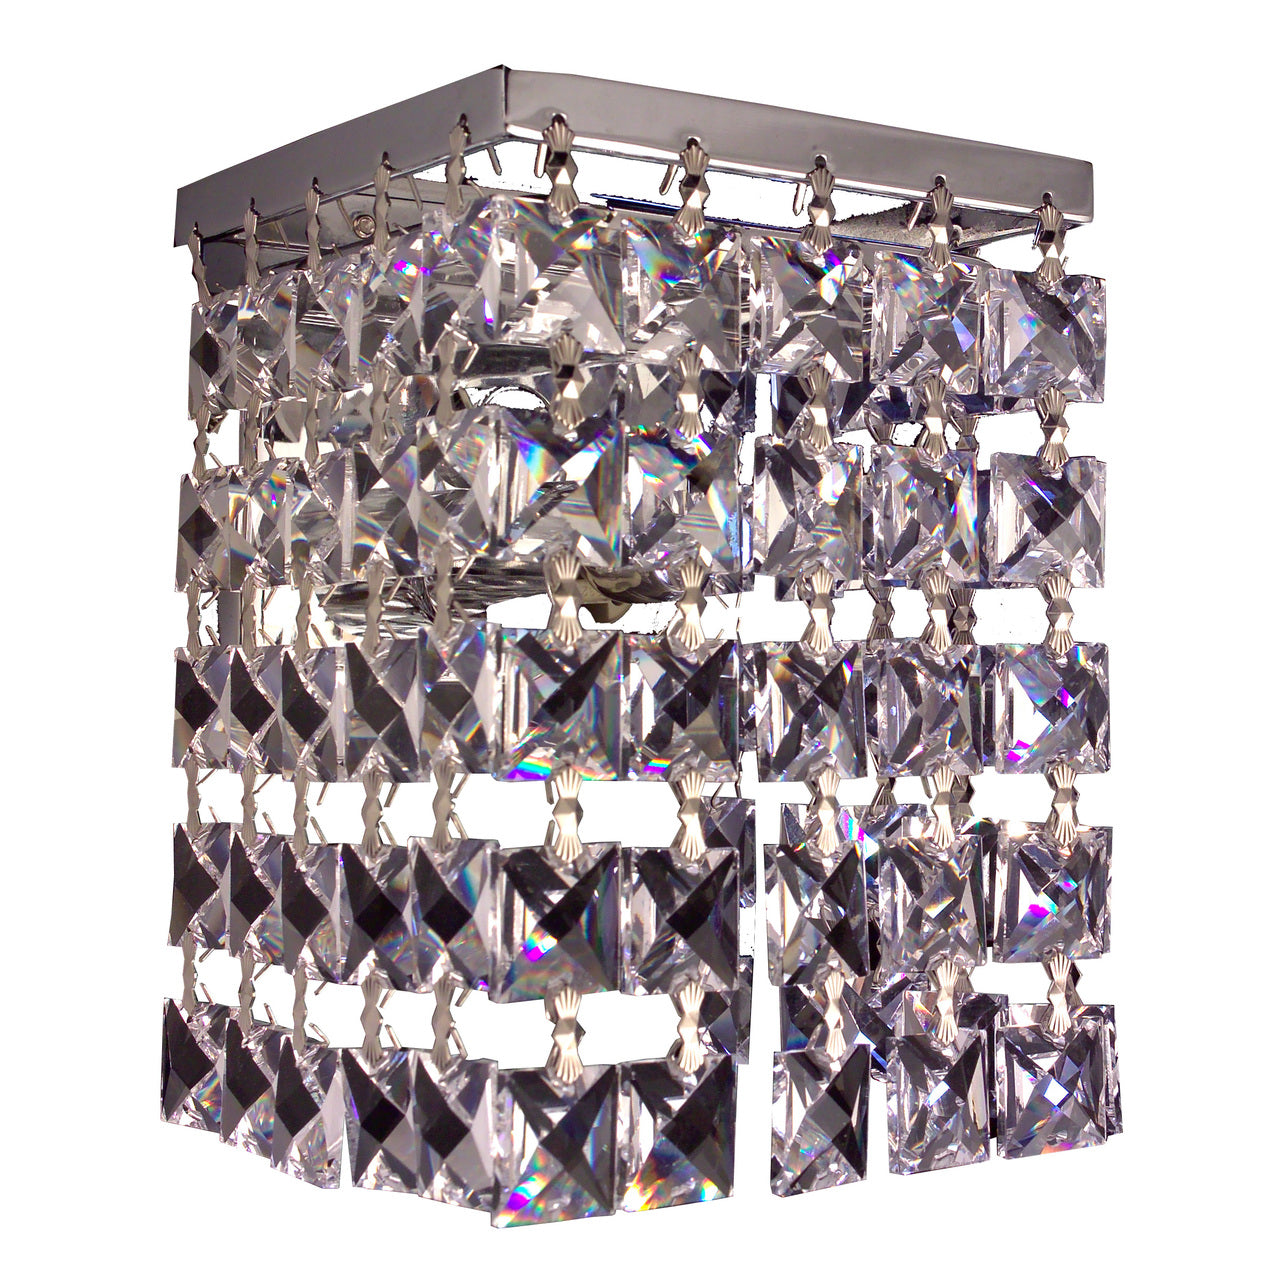 Classic Lighting 16102 CPSQ Bedazzle Crystal Wall Sconce in Chrome